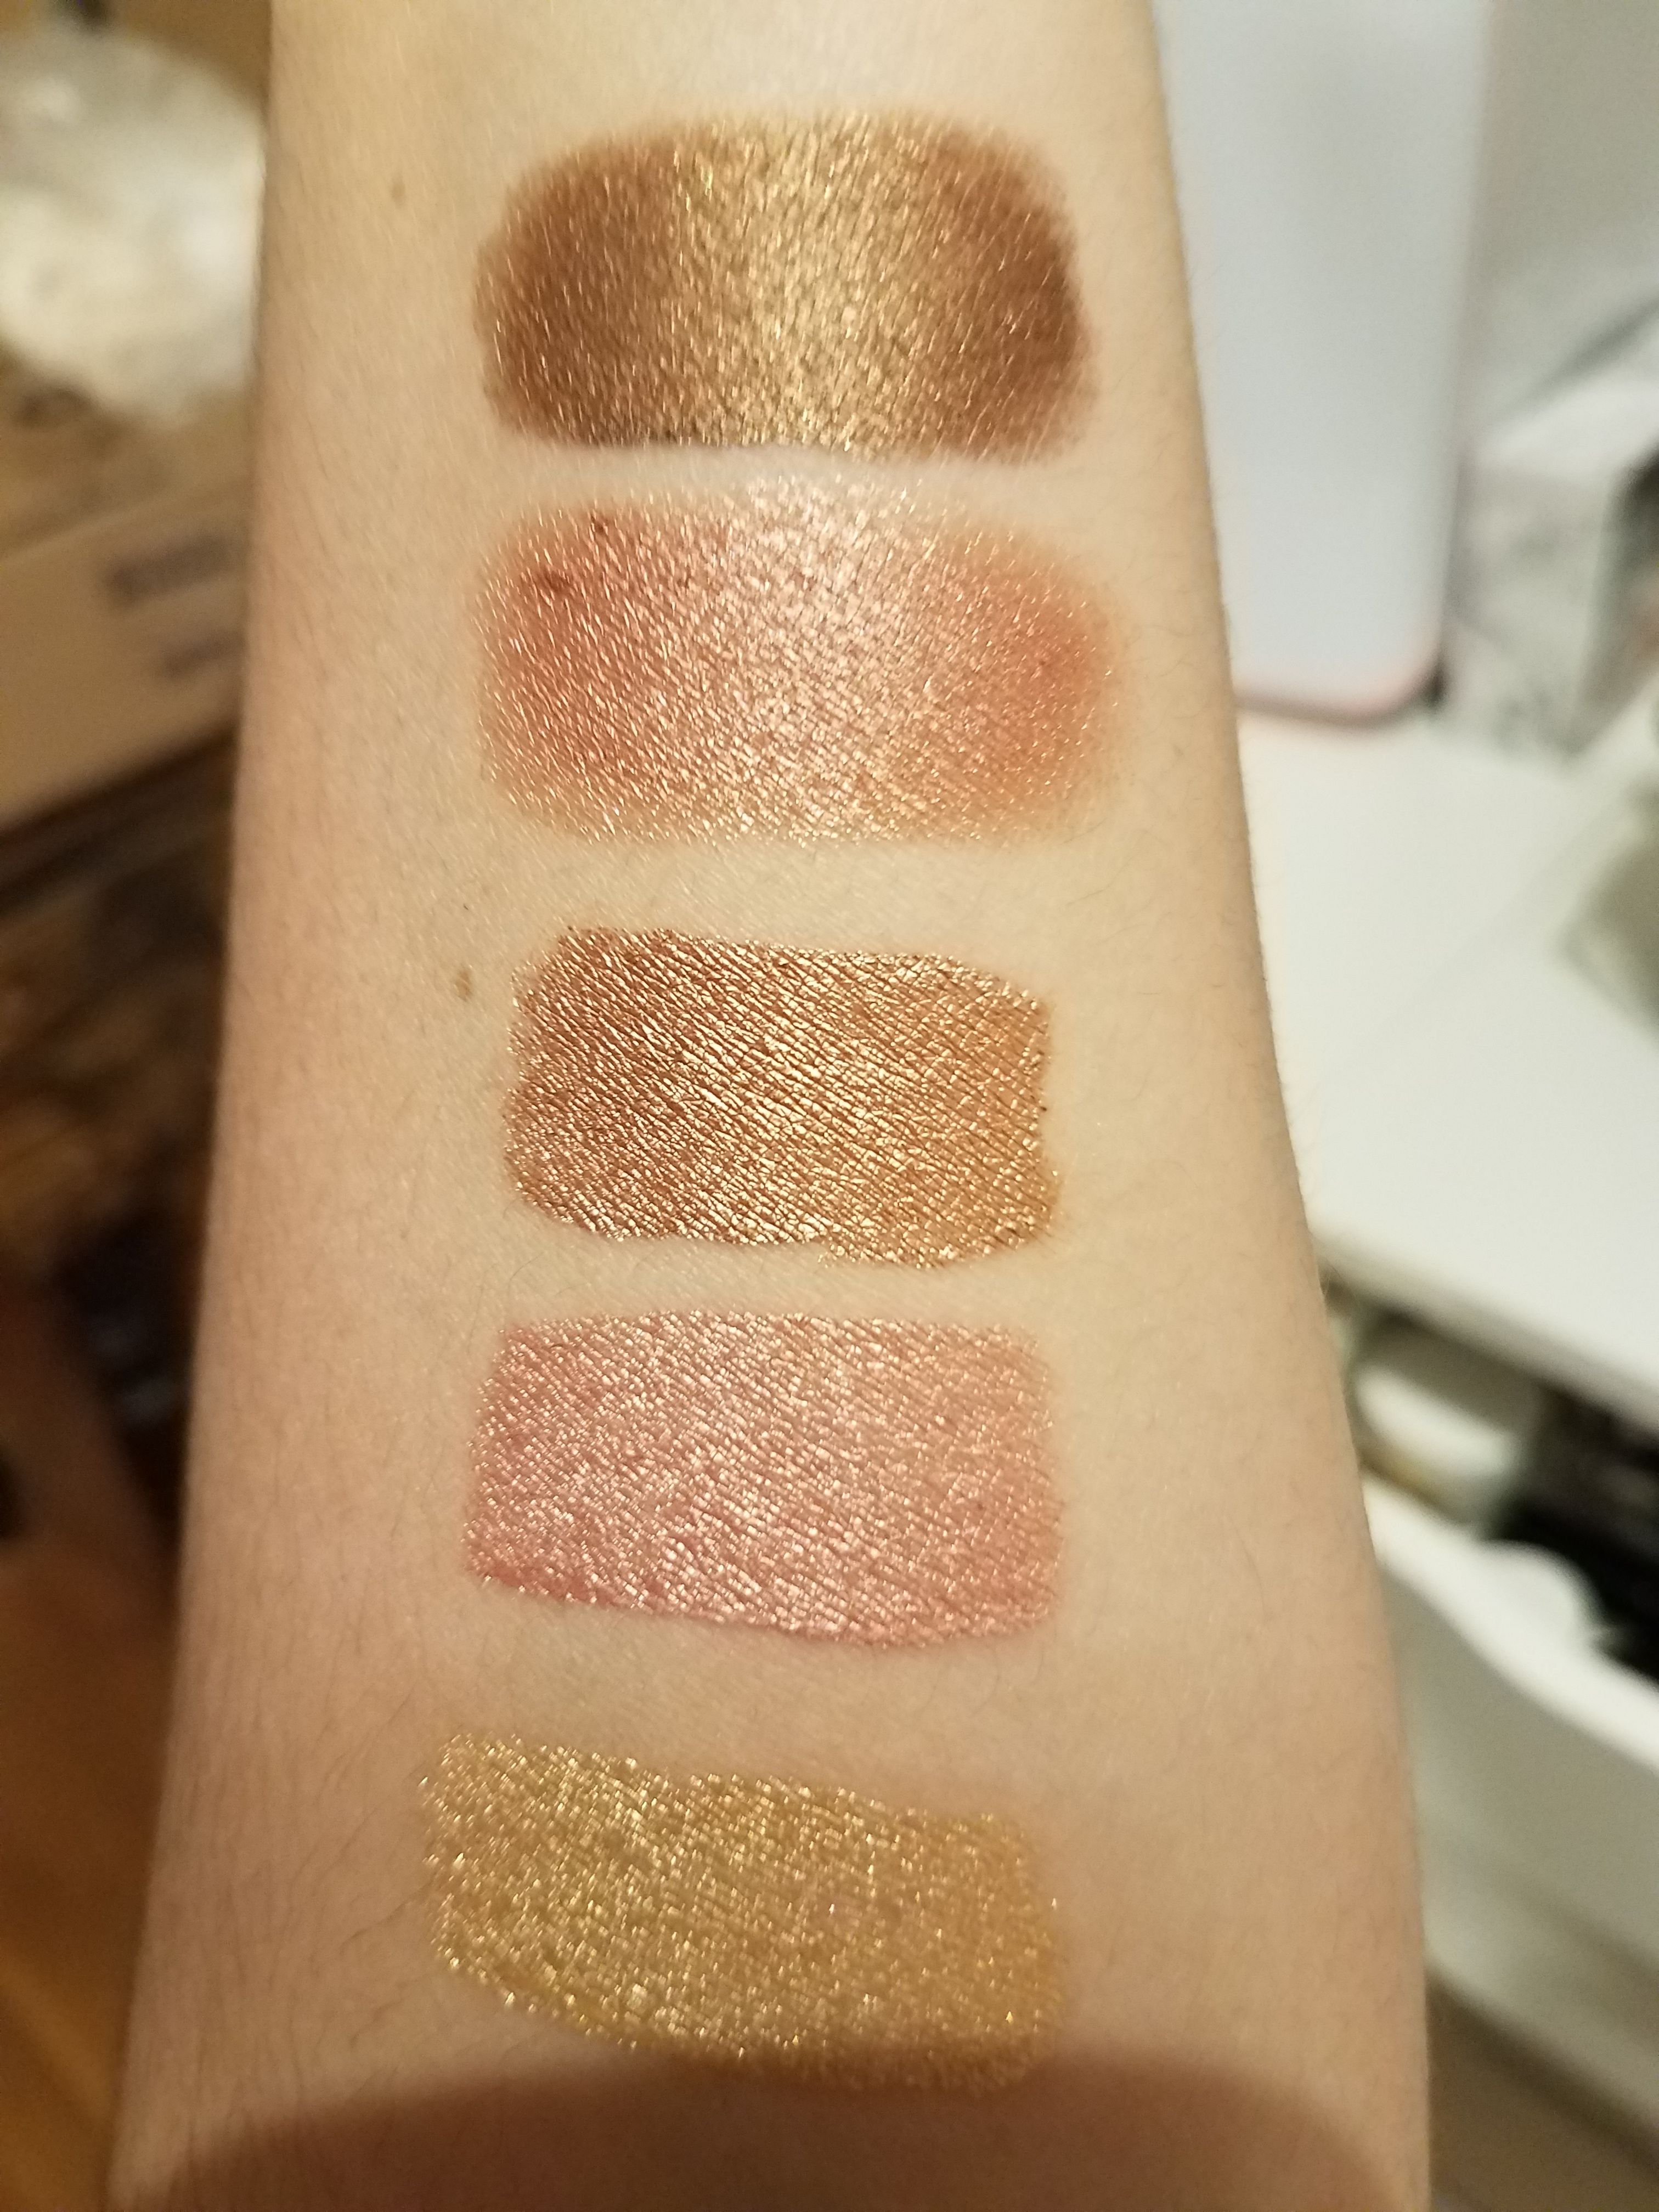 Here are swatches of the acqua metal sha... - Page 109 - Beauty Insider  Community